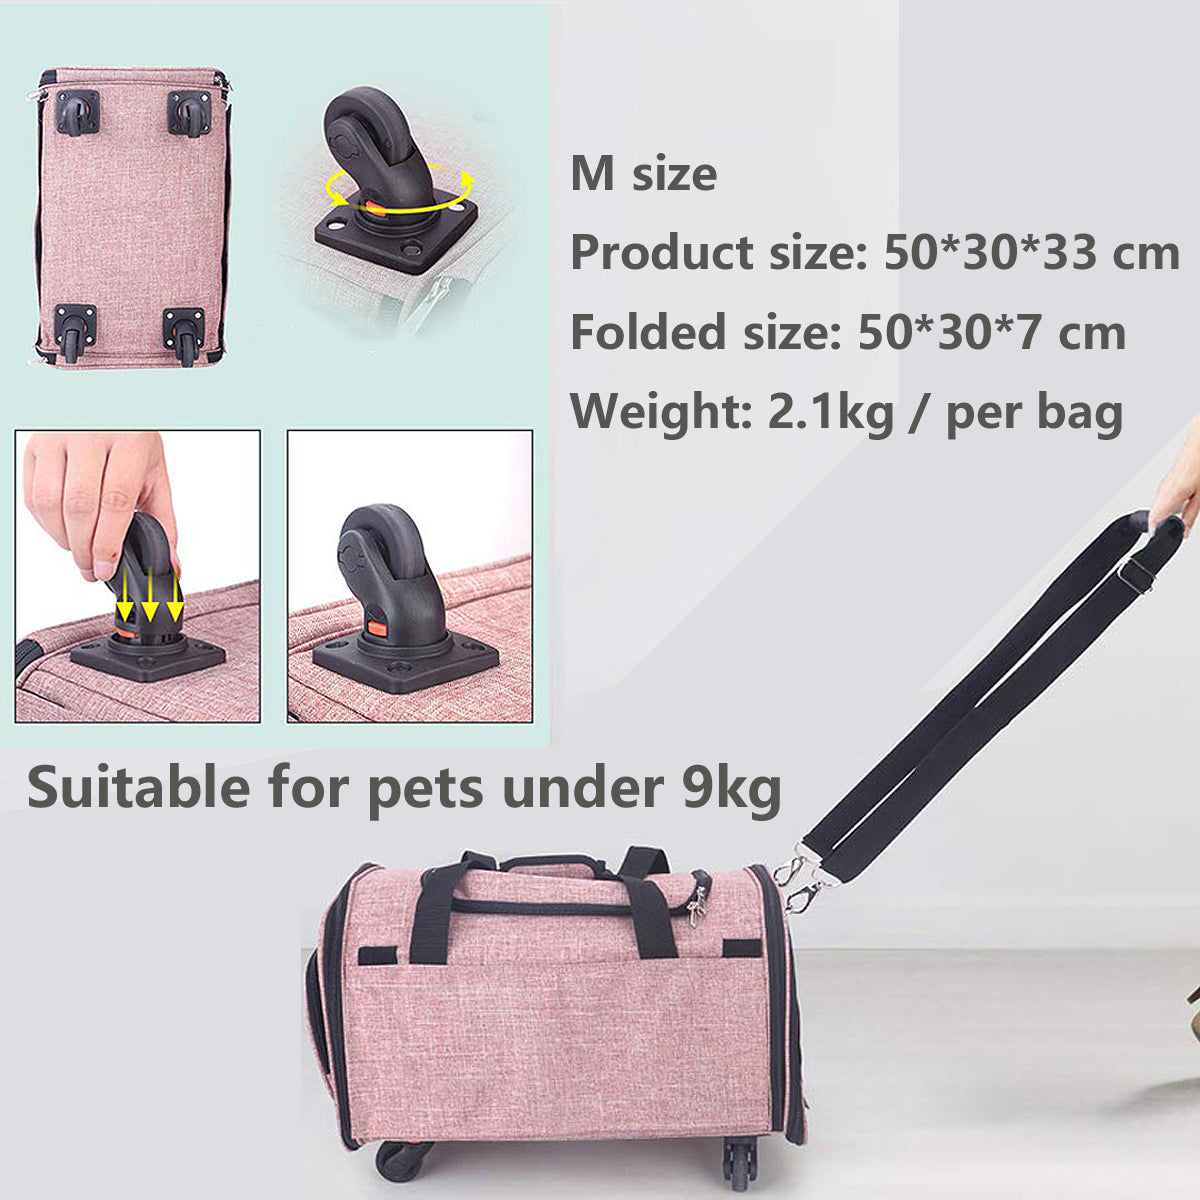 (PINK-M Size)Small dog cage trolley case-Foldable small pet carrier bags-Dog carriers for small dogs-Dog travel bag detachable rollers travel crate car carrier - Cat carriers for large cats under 9 kg